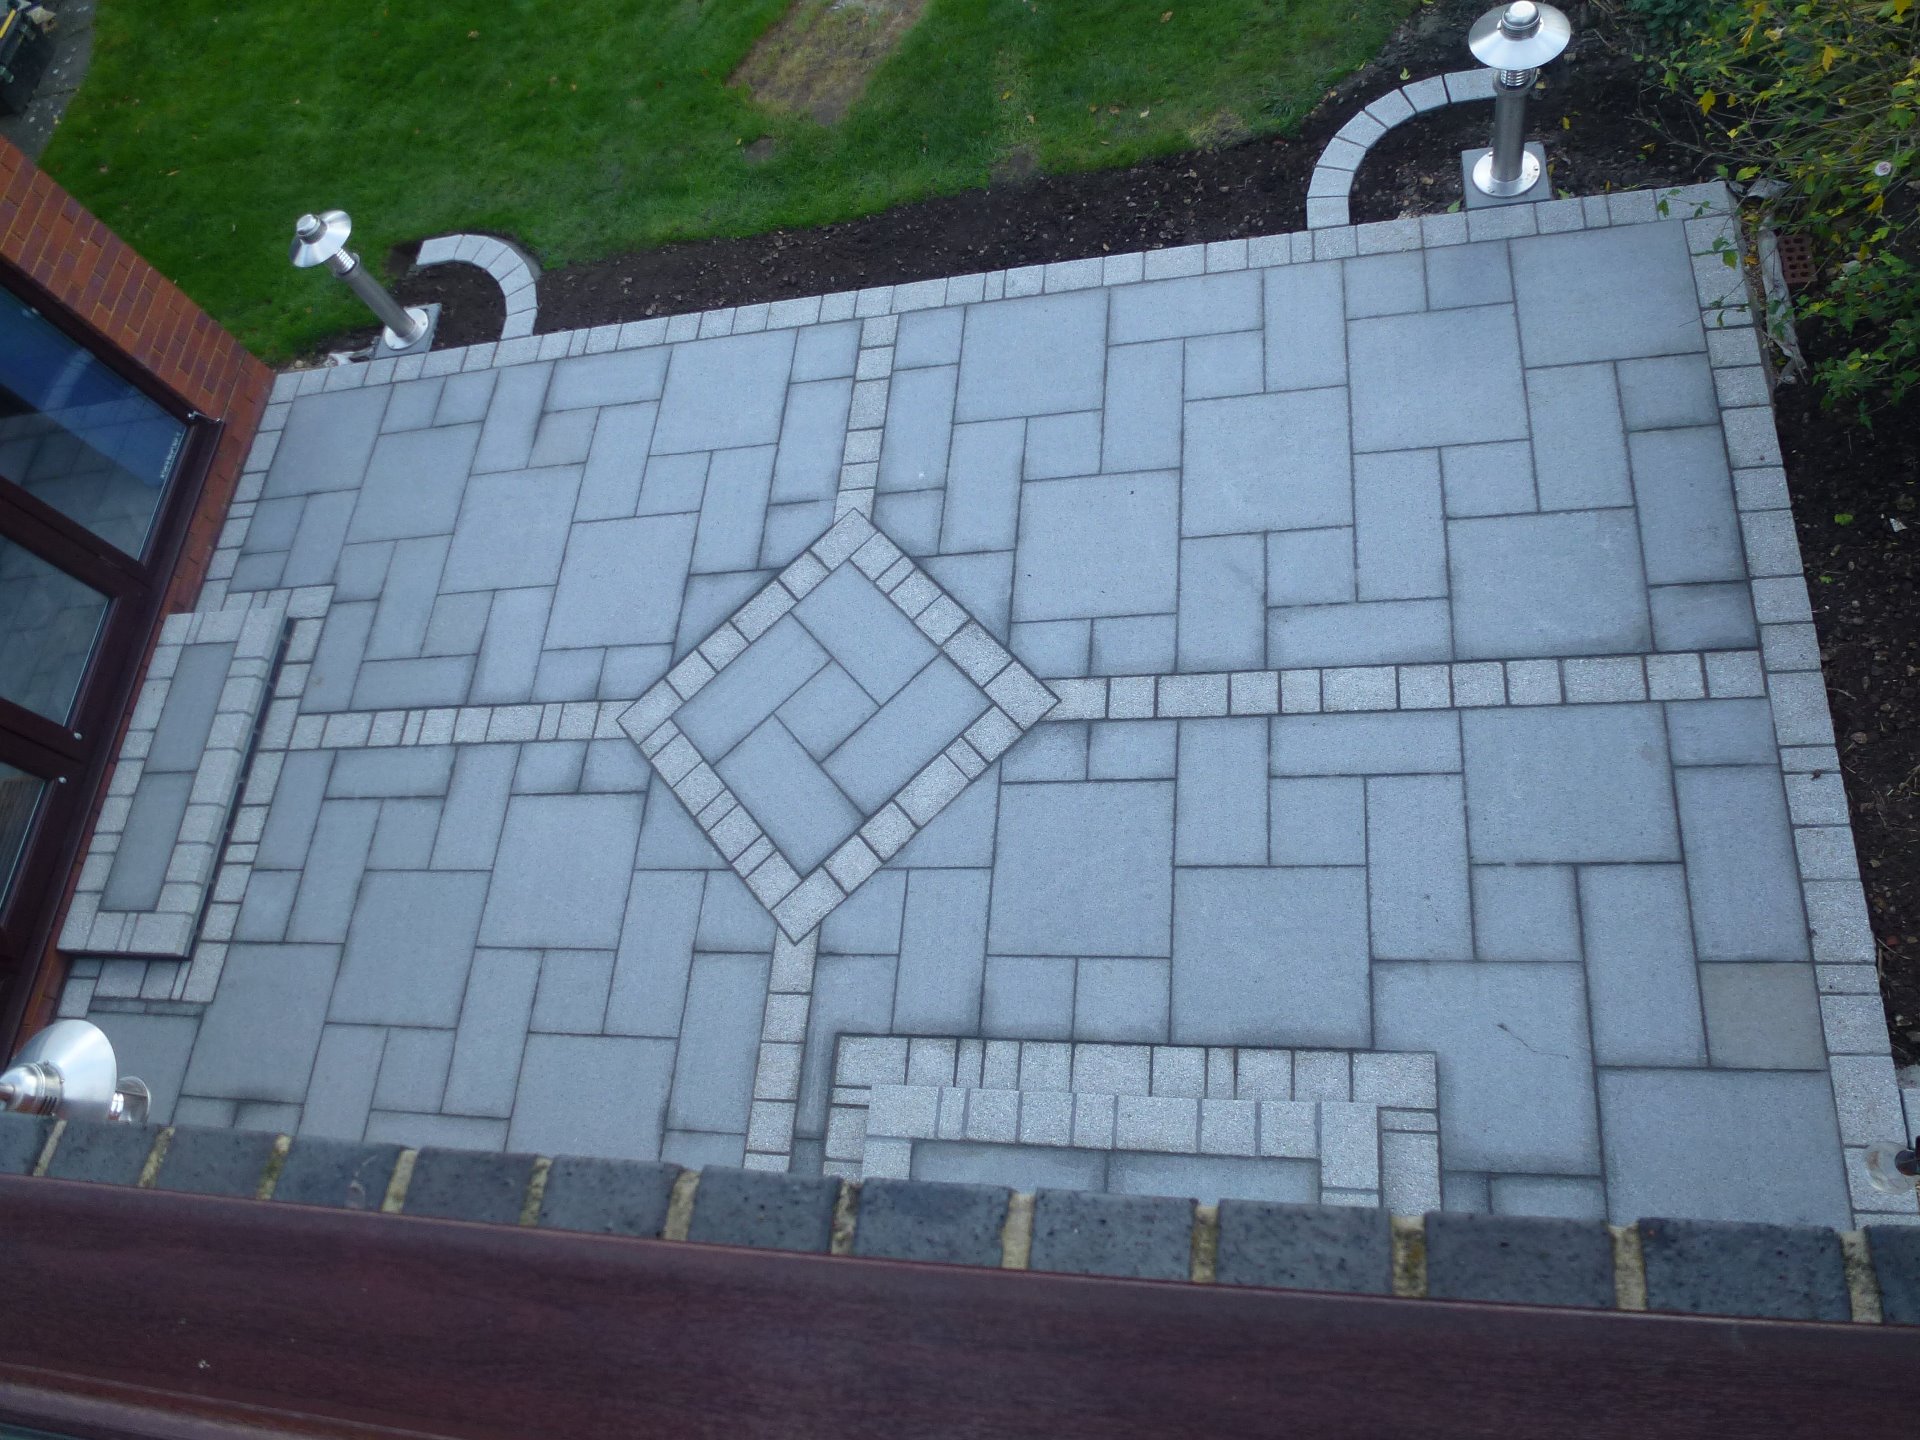 A patio laid with grey granite slabs, steps up to the patio doors, lighting, smooth paving